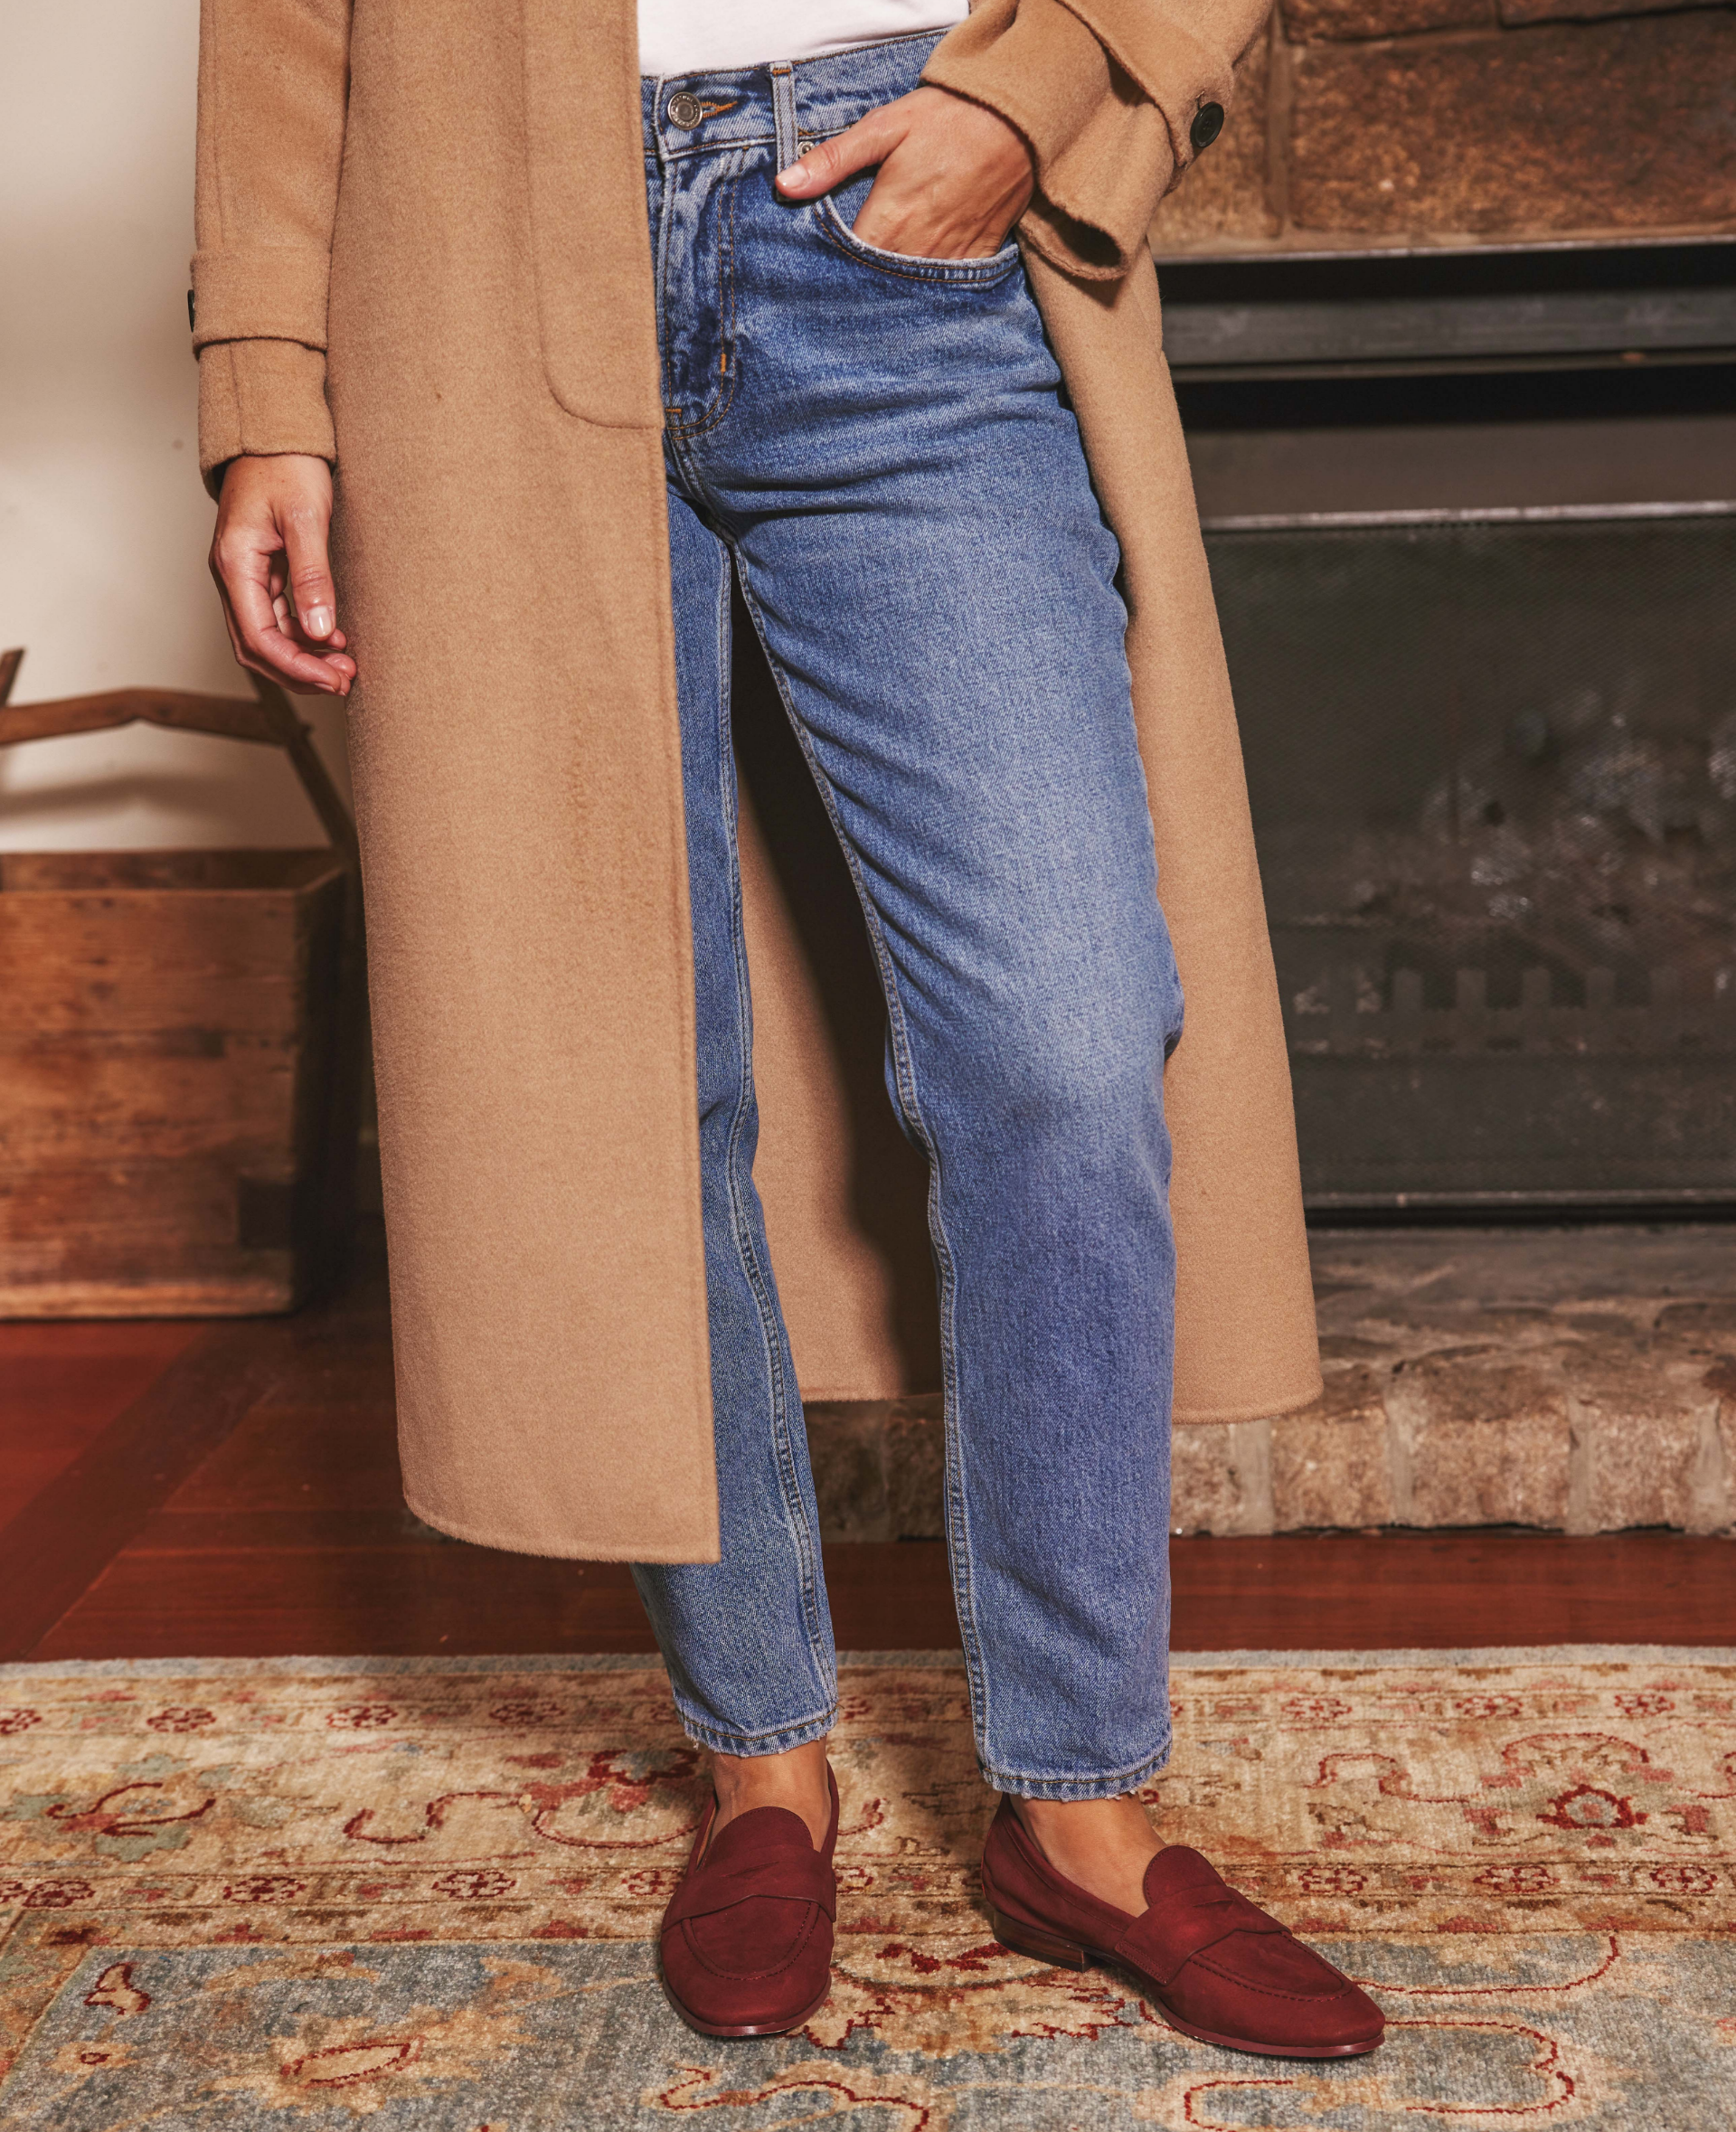 How To Wear Loafers With Socks This Fall